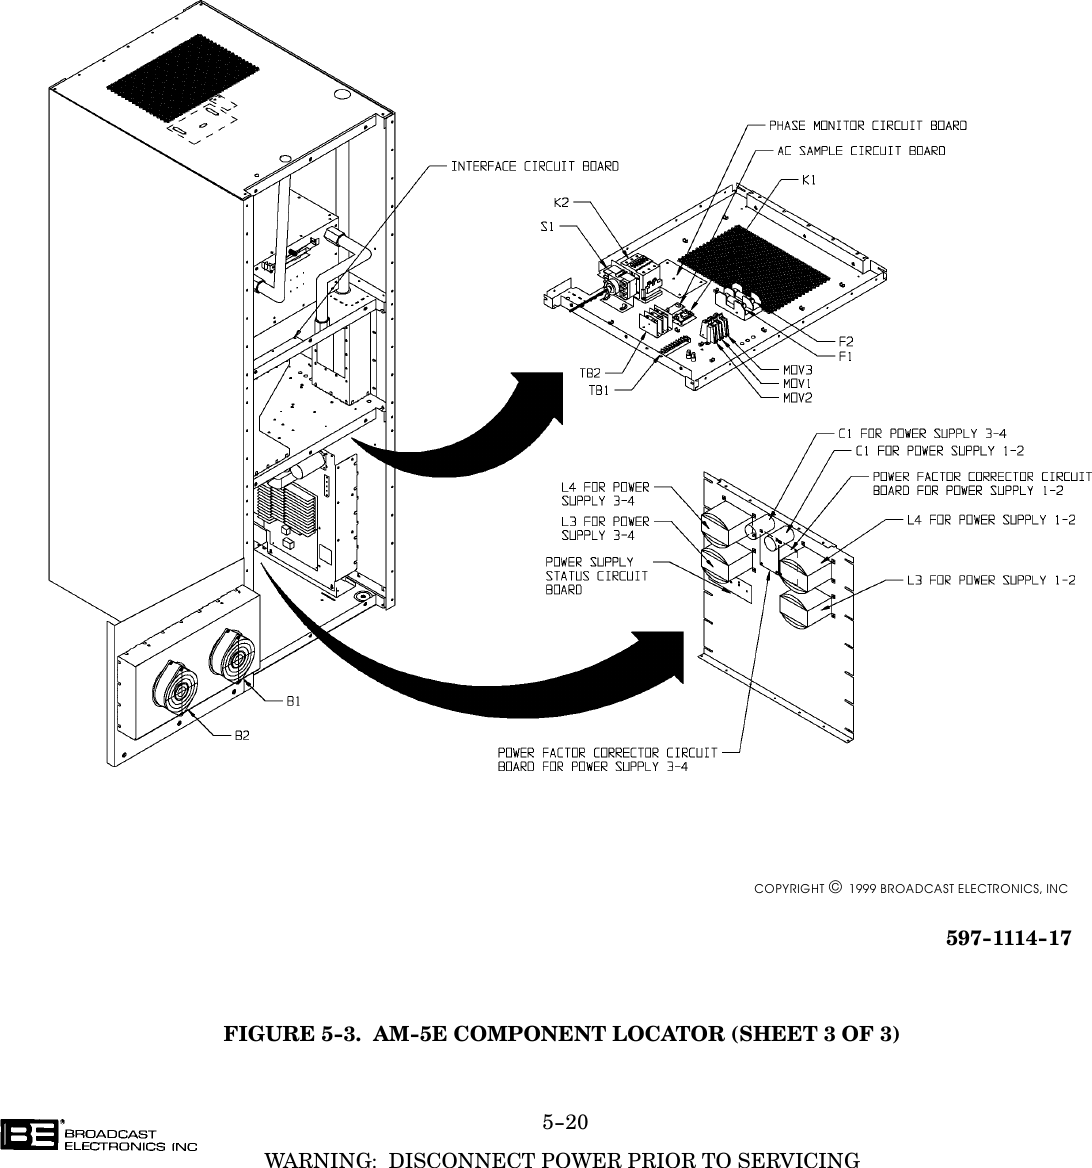 5-20WARNING:  DISCONNECT POWER PRIOR TO SERVICINGCOPYRIGHT  1999 BROADCAST ELECTRONICS, INC597-1114-17FIGURE 5-3.  AM-5E COMPONENT LOCATOR (SHEET 3 OF 3)